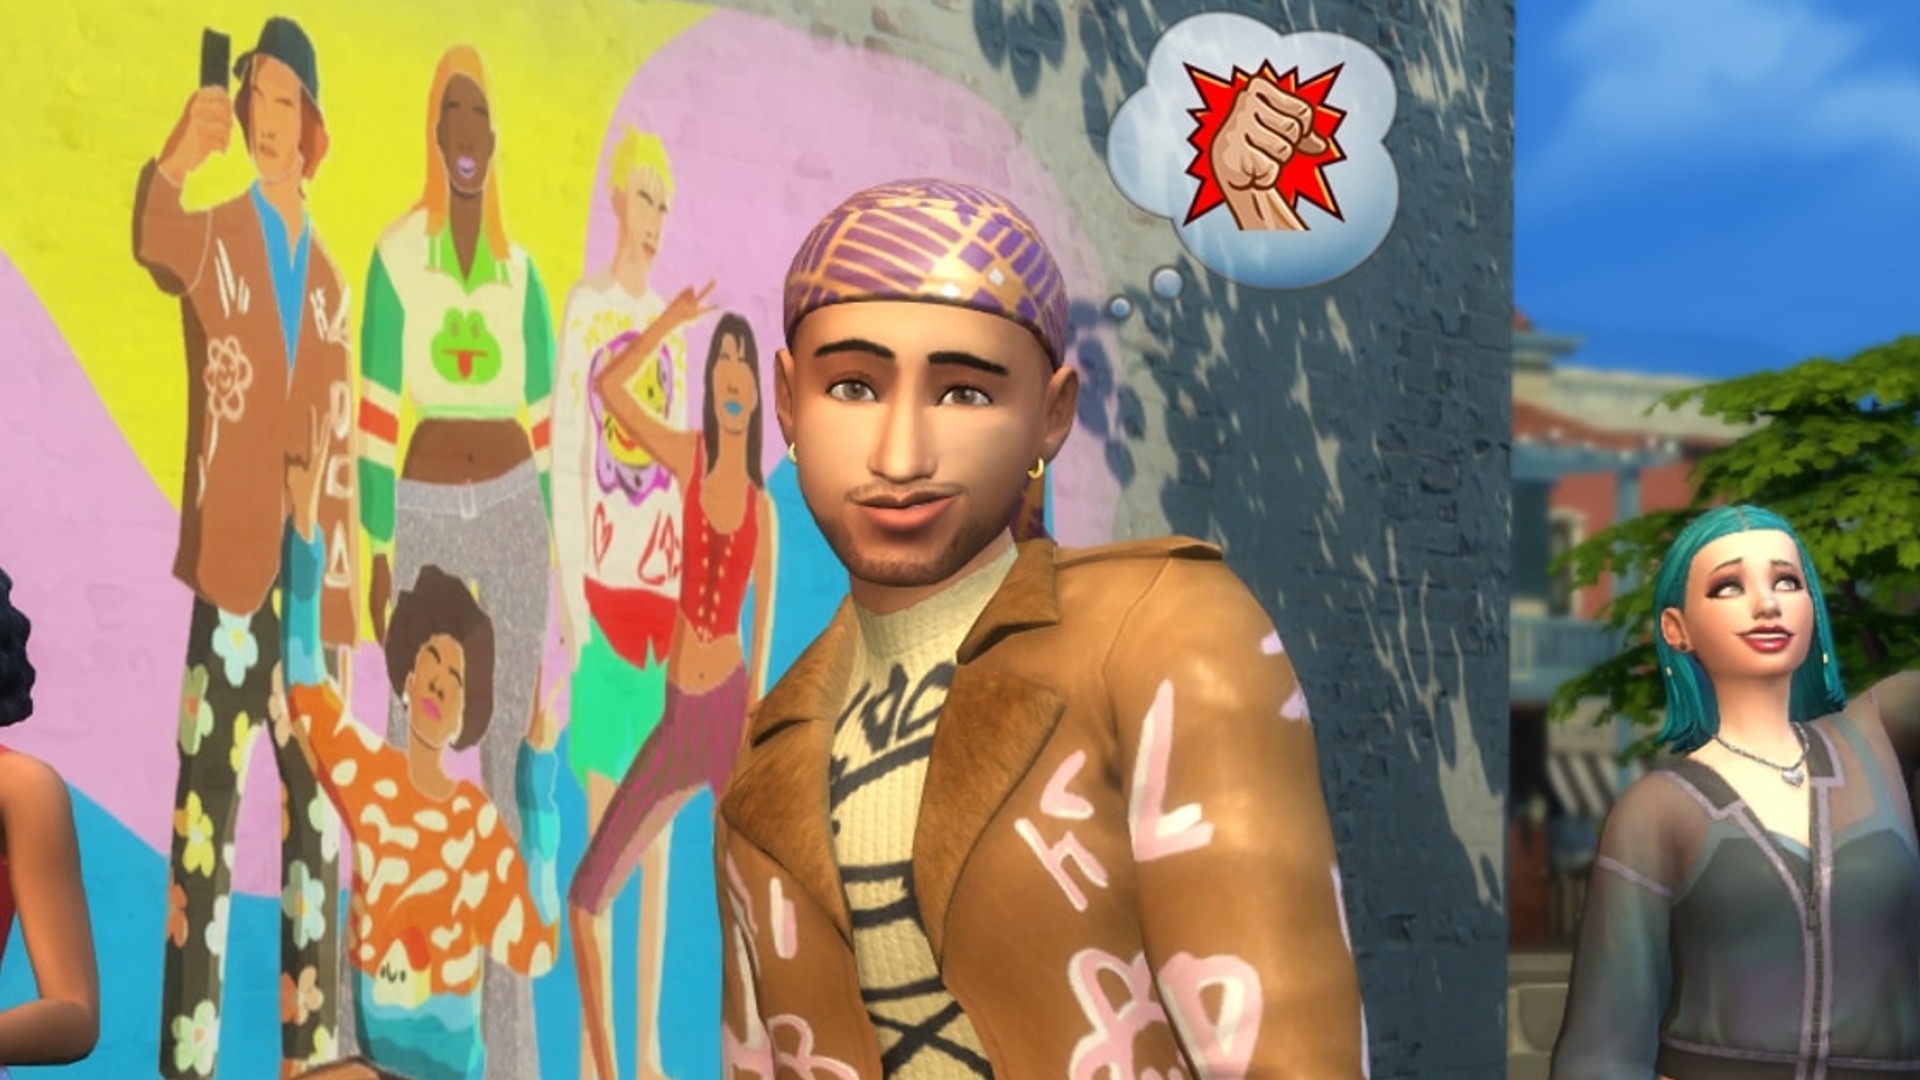 Sims 4 update guts gallery of sweary, “unacceptable content”